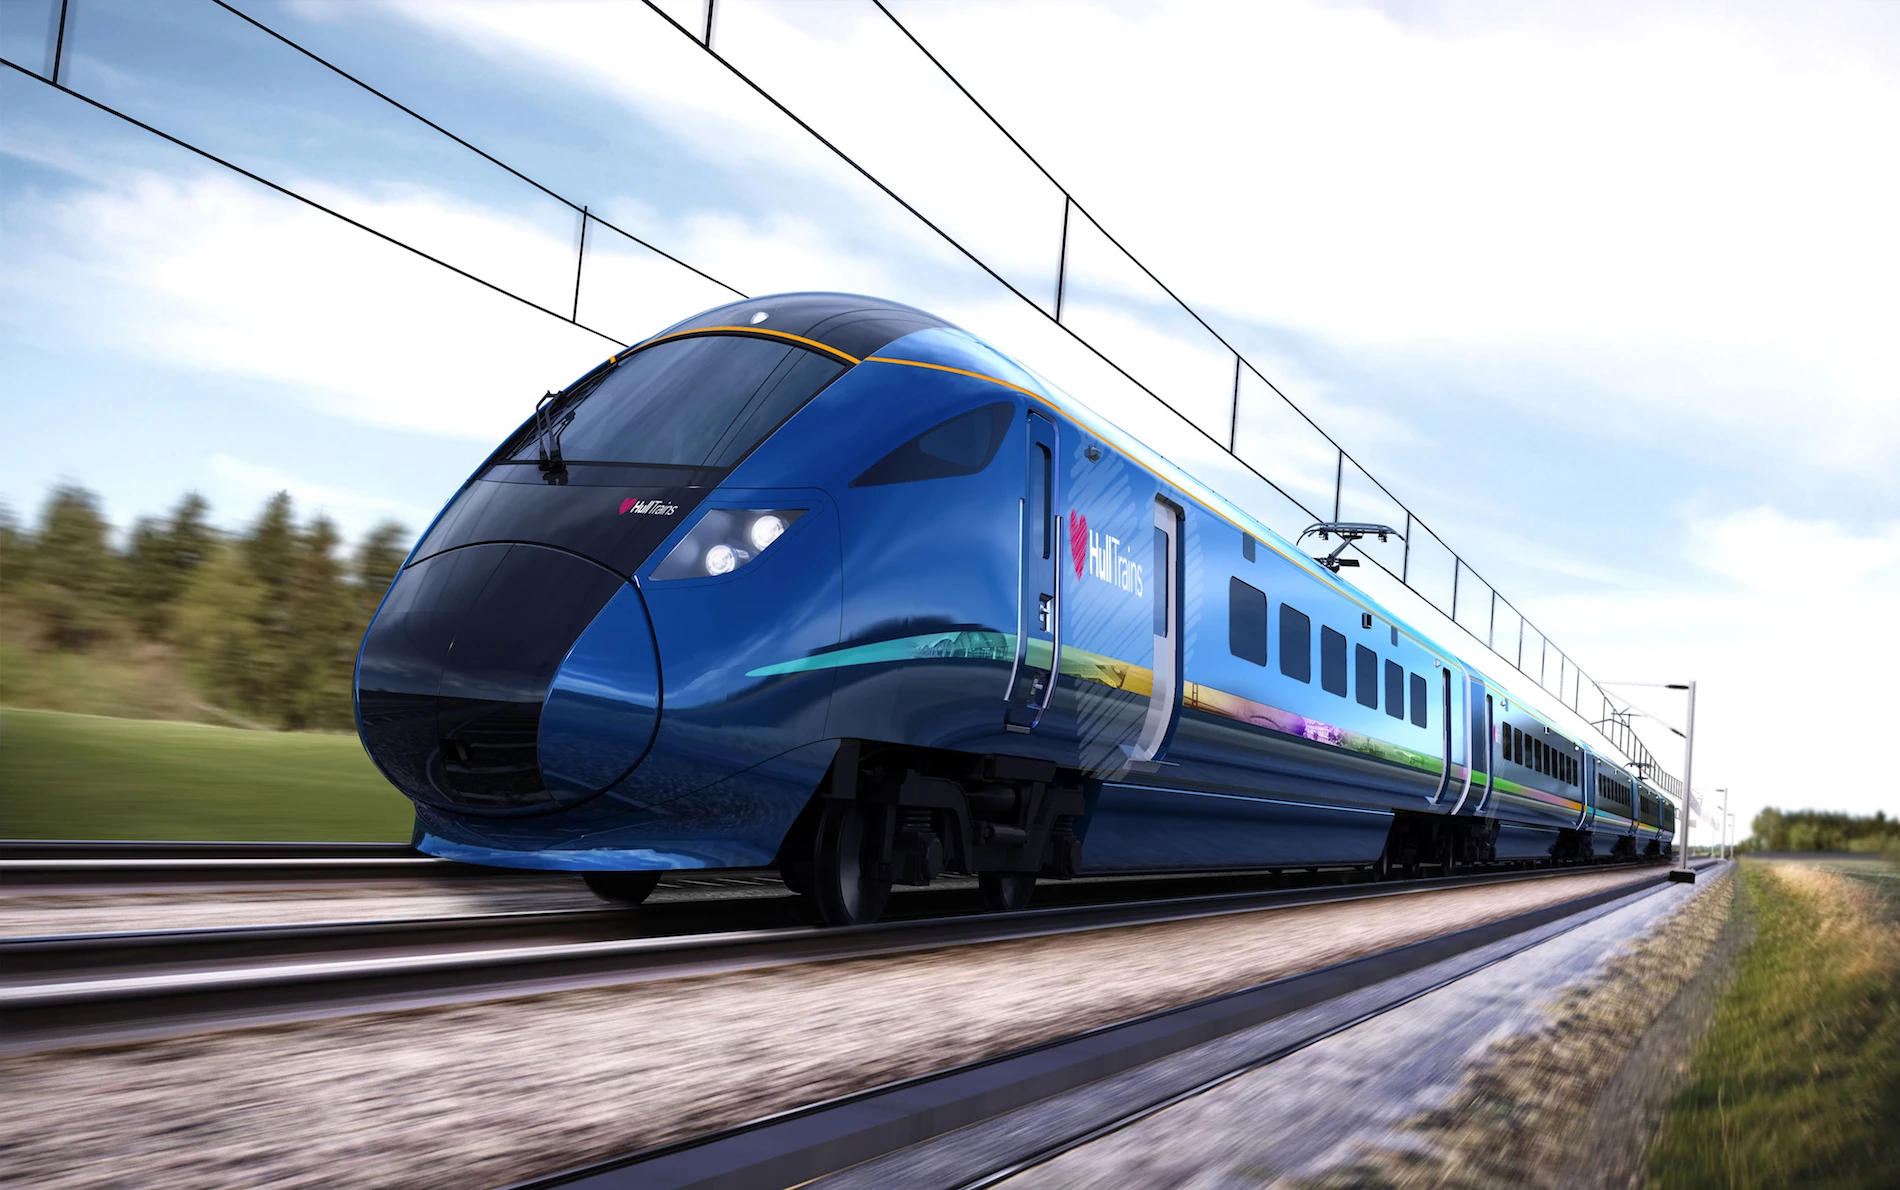 An artist's impression of the new Hull Trains